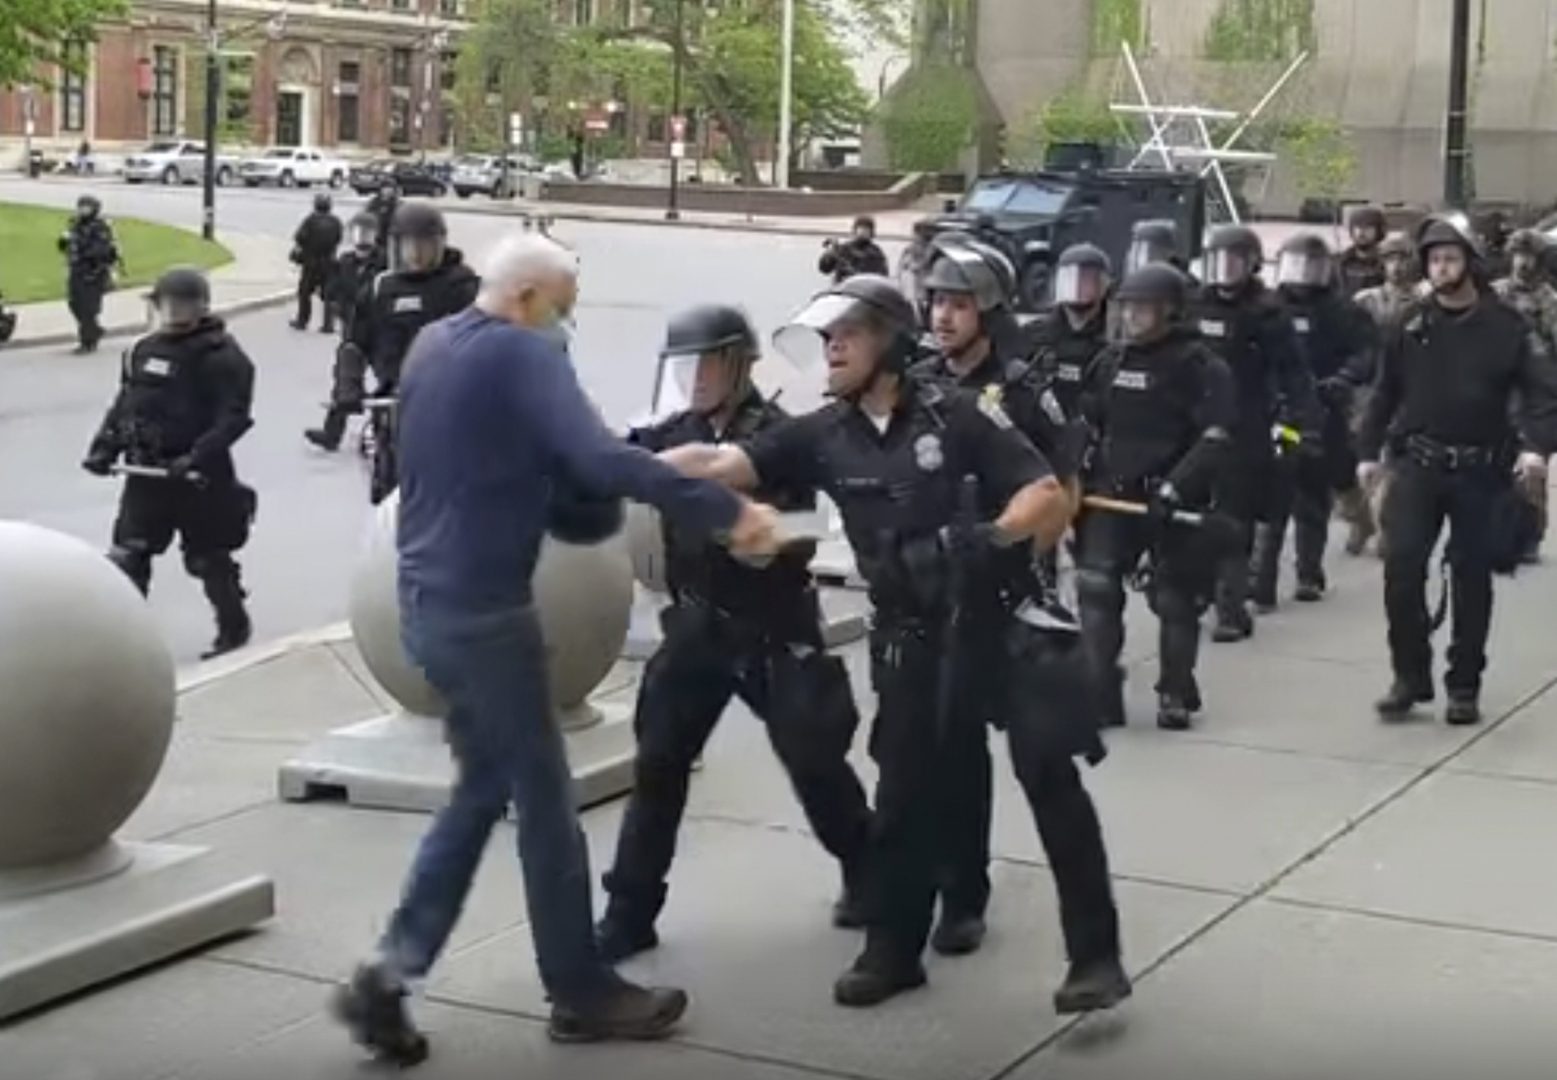 In this image from video provided by WBFO, a Buffalo police officer appears to shove a man who walked up to police Thursday, June 4, 2020, in Buffalo, N.Y. Video from WBFO shows the man appearing to hit his head on the pavement, with blood leaking out as officers walk past to clear Niagara Square. Buffalo police initially said in a statement that a person “was injured when he tripped & fell,” WIVB-TV reported, but Capt. Jeff Rinaldo later told the TV station that an internal affairs investigation was opened.